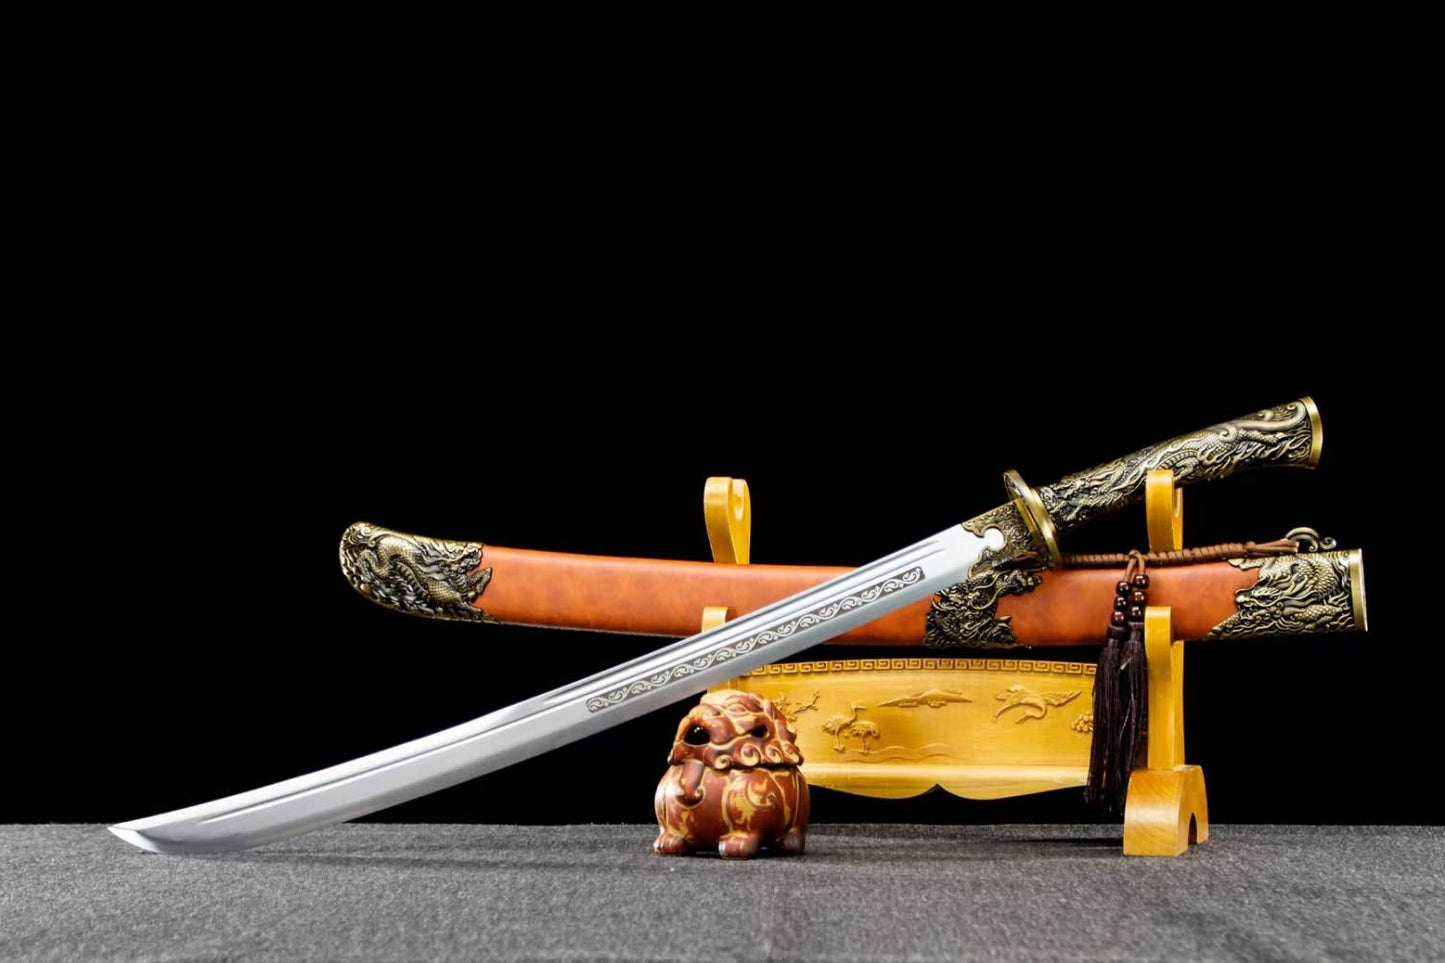 Qing dao Dynasty Army Sabre,Forged Blade with Alloy Fittings and PU Scabbard